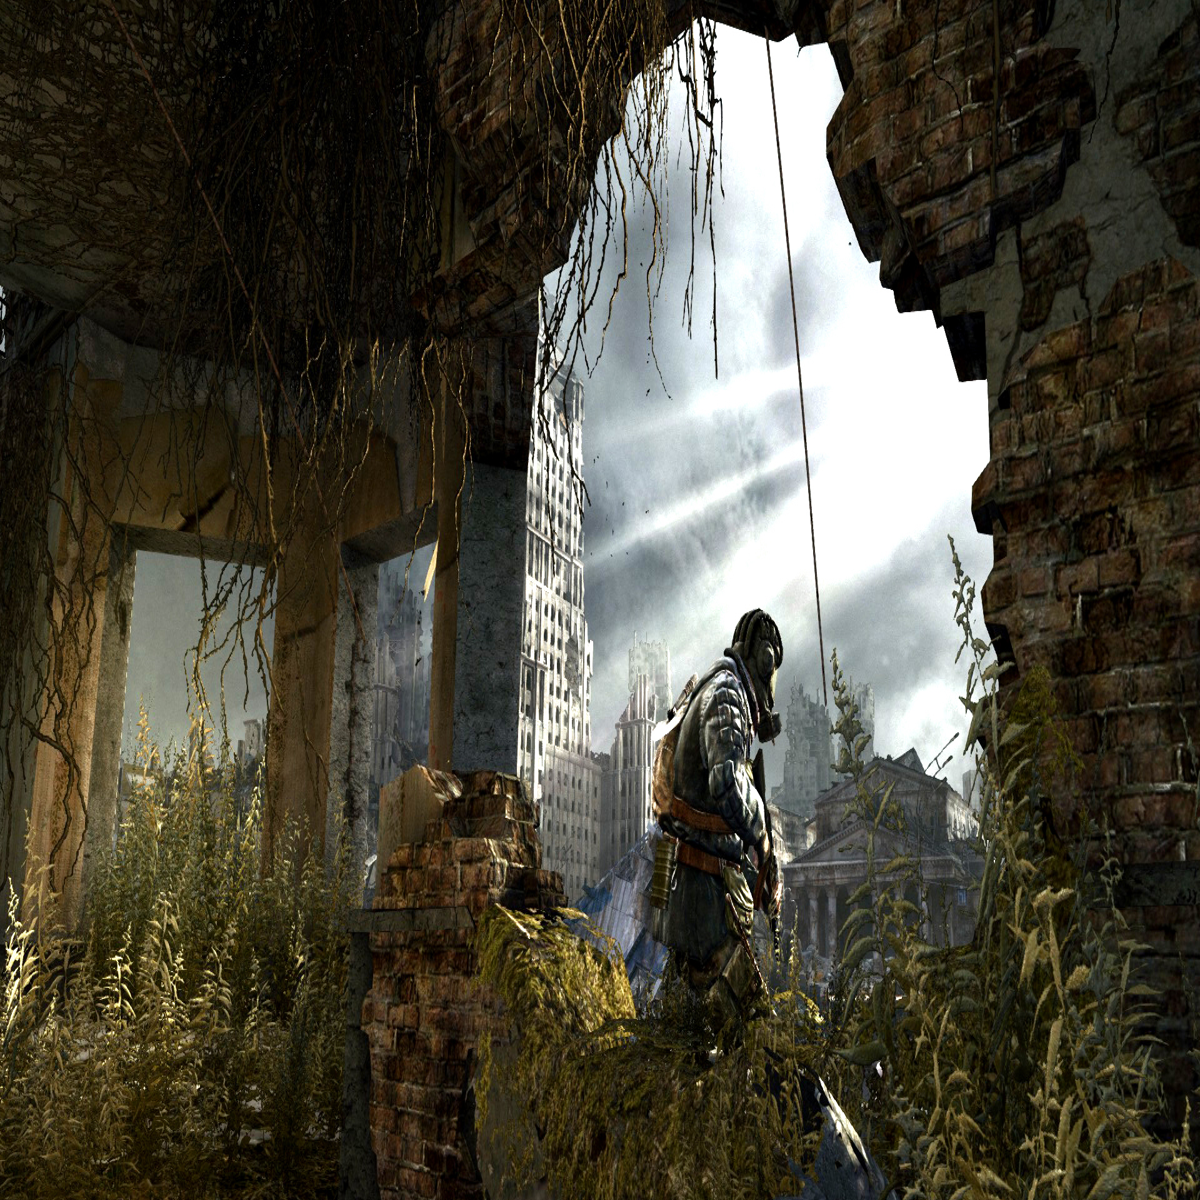 Metro: Last Light' Is Now Free on Steam, But Only for a Week